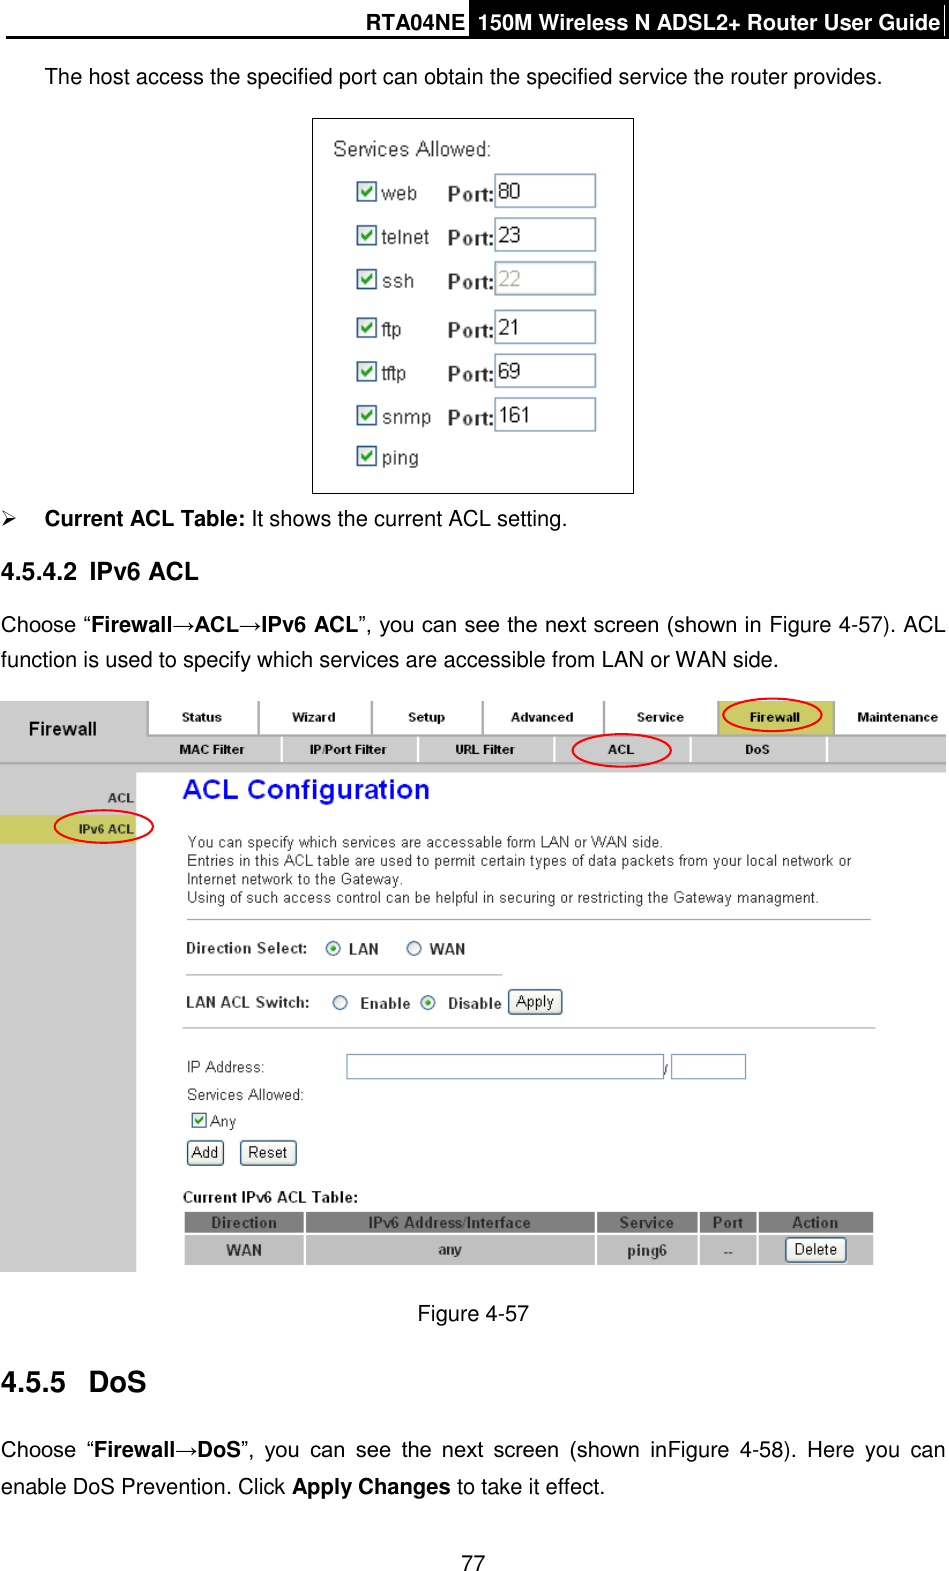 RTA04NE 150M Wireless N ADSL2+ Router User Guide  77 The host access the specified port can obtain the specified service the router provides.   Current ACL Table: It shows the current ACL setting. 4.5.4.2  IPv6 ACL Choose “Firewall→ACL→IPv6 ACL”, you can see the next screen (shown in Figure 4-57). ACL function is used to specify which services are accessible from LAN or WAN side.  Figure 4-57 4.5.5  DoS Choose  “Firewall→DoS”,  you  can  see  the  next  screen  (shown  inFigure  4-58).  Here  you  can enable DoS Prevention. Click Apply Changes to take it effect. 